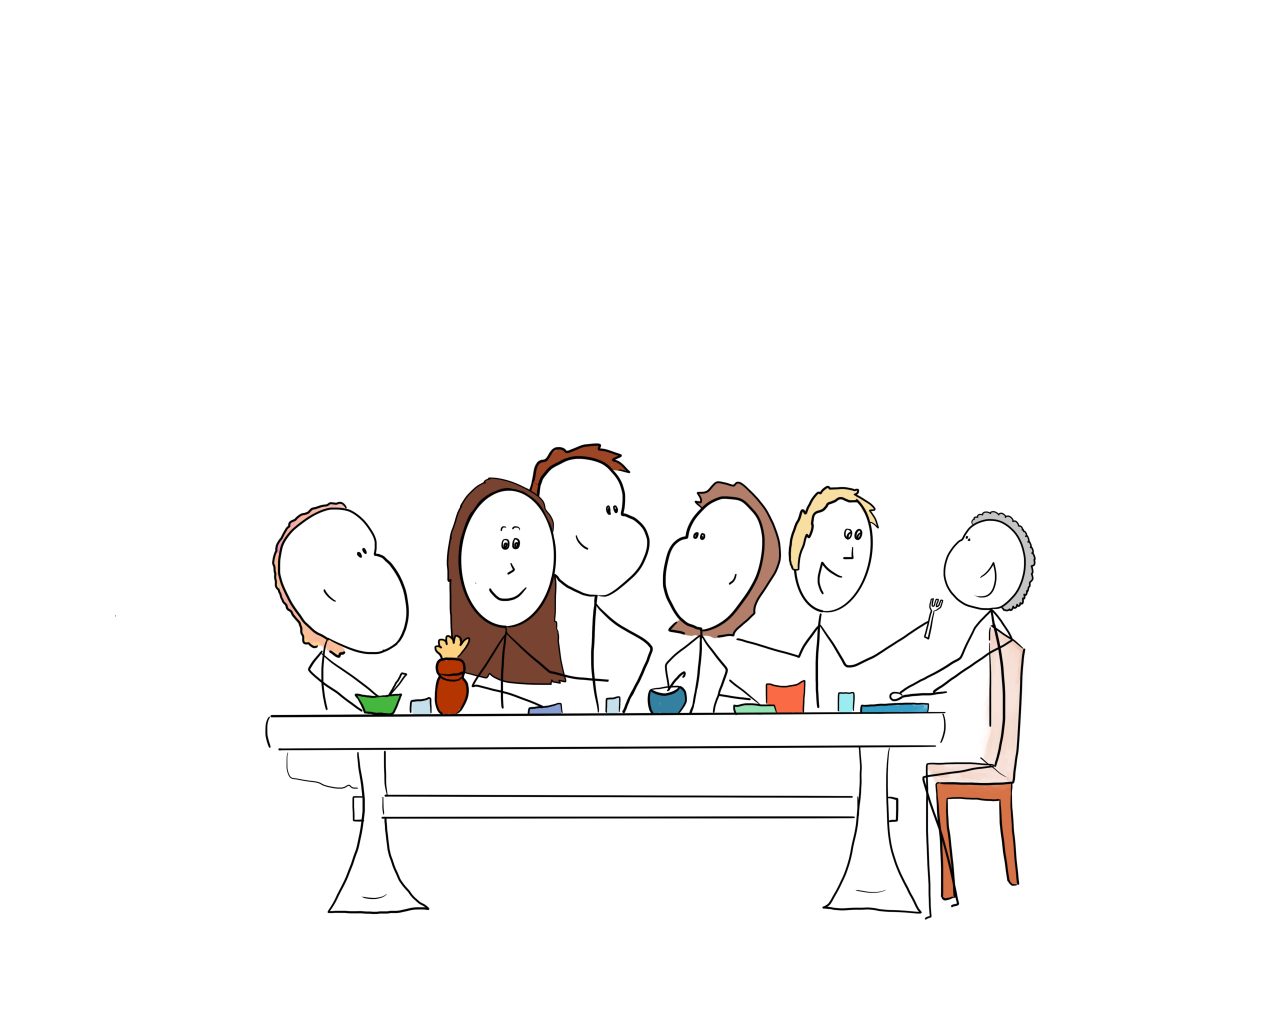 Six people sitting around a dinner table, talking and enjoying themselves.